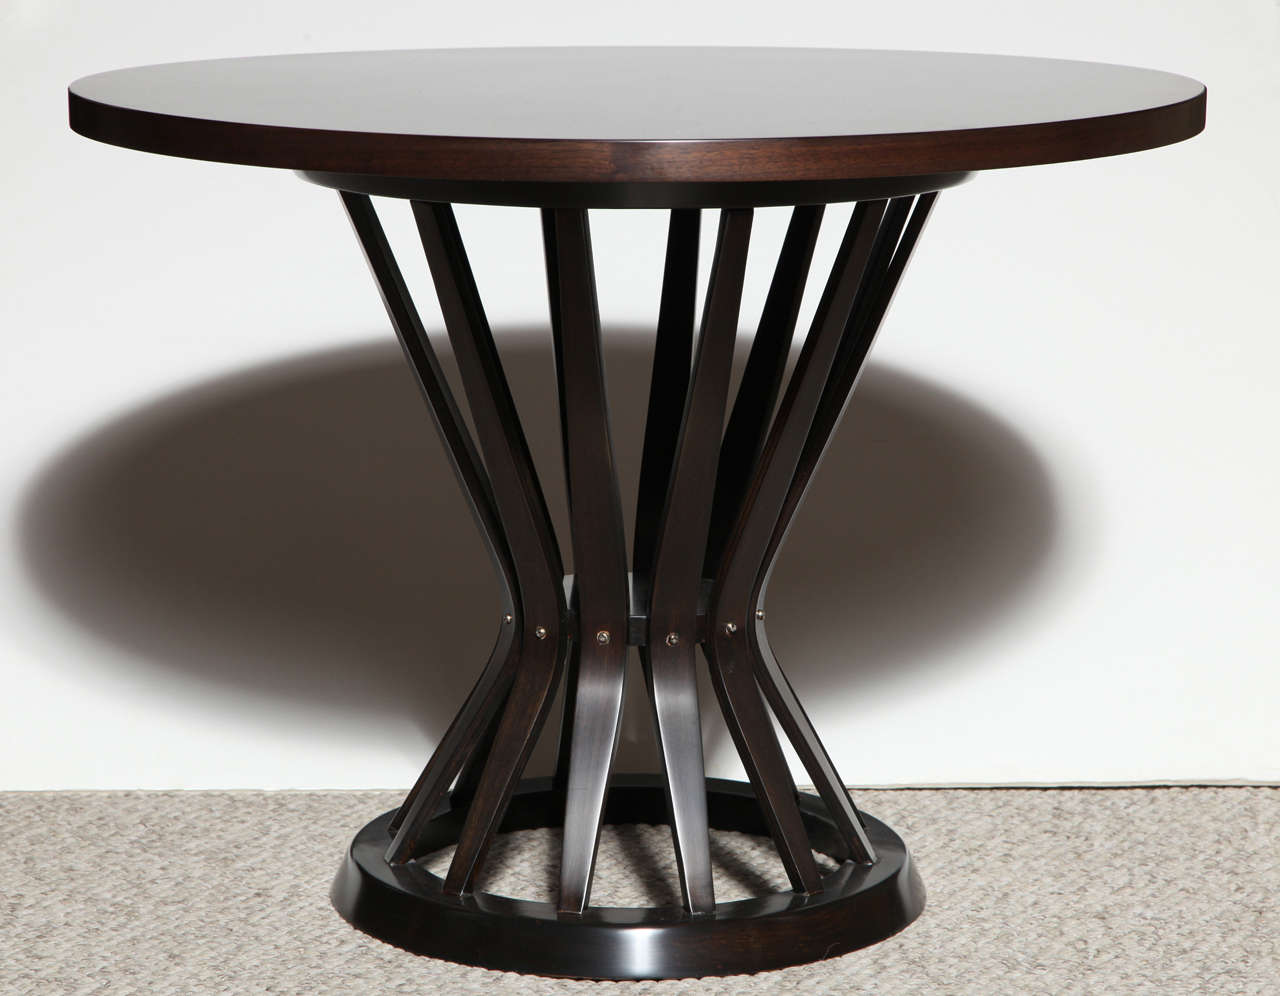 Circular walnut top and mahogany base of tapering, bent wood slats.   one of many iconic Wormley designs.